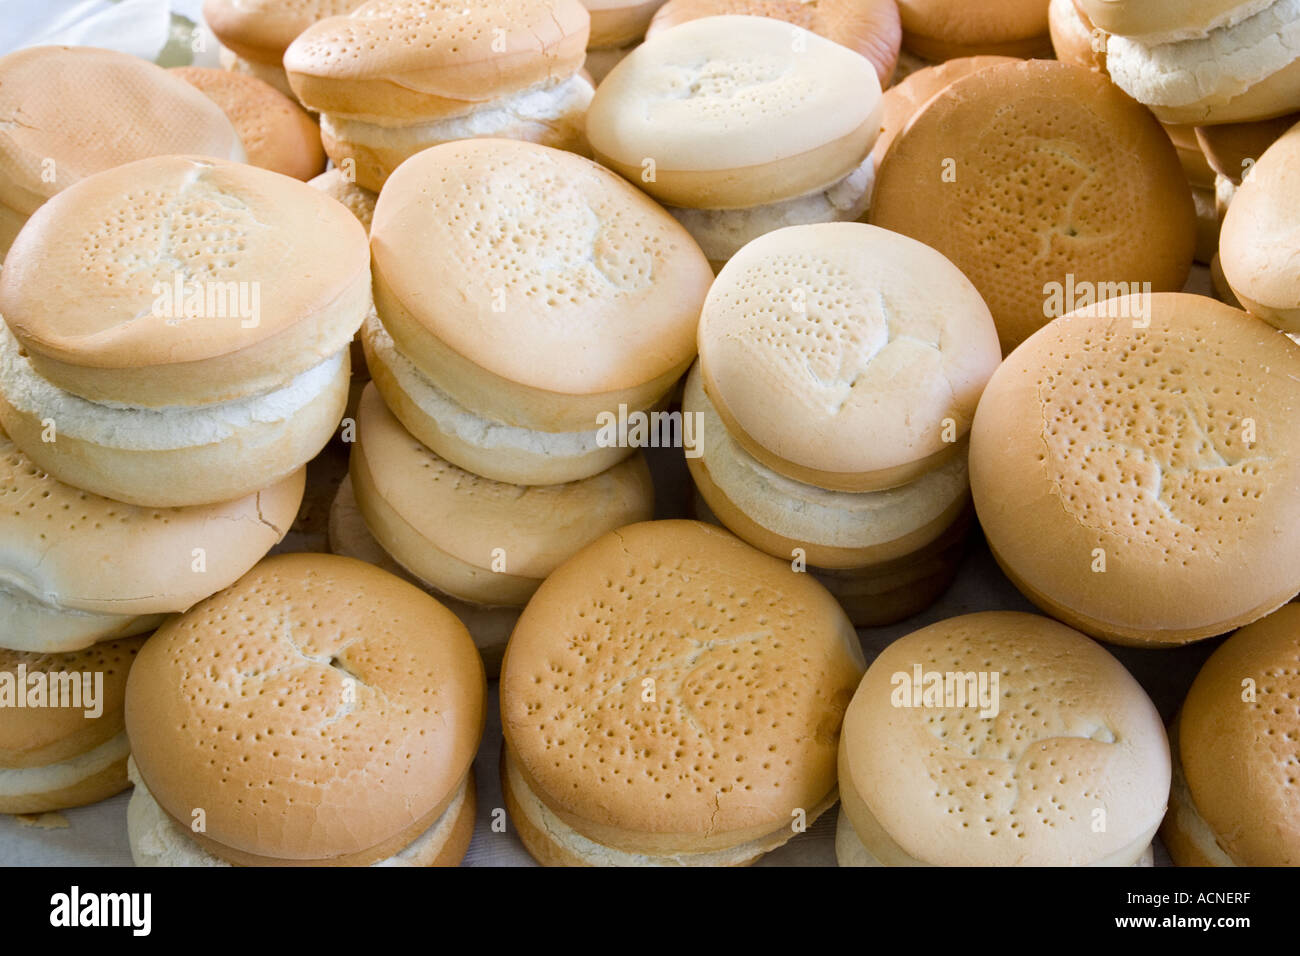 Traditional rounded white bread (Pan blanco), Andalusia, Spain. Stock Photo